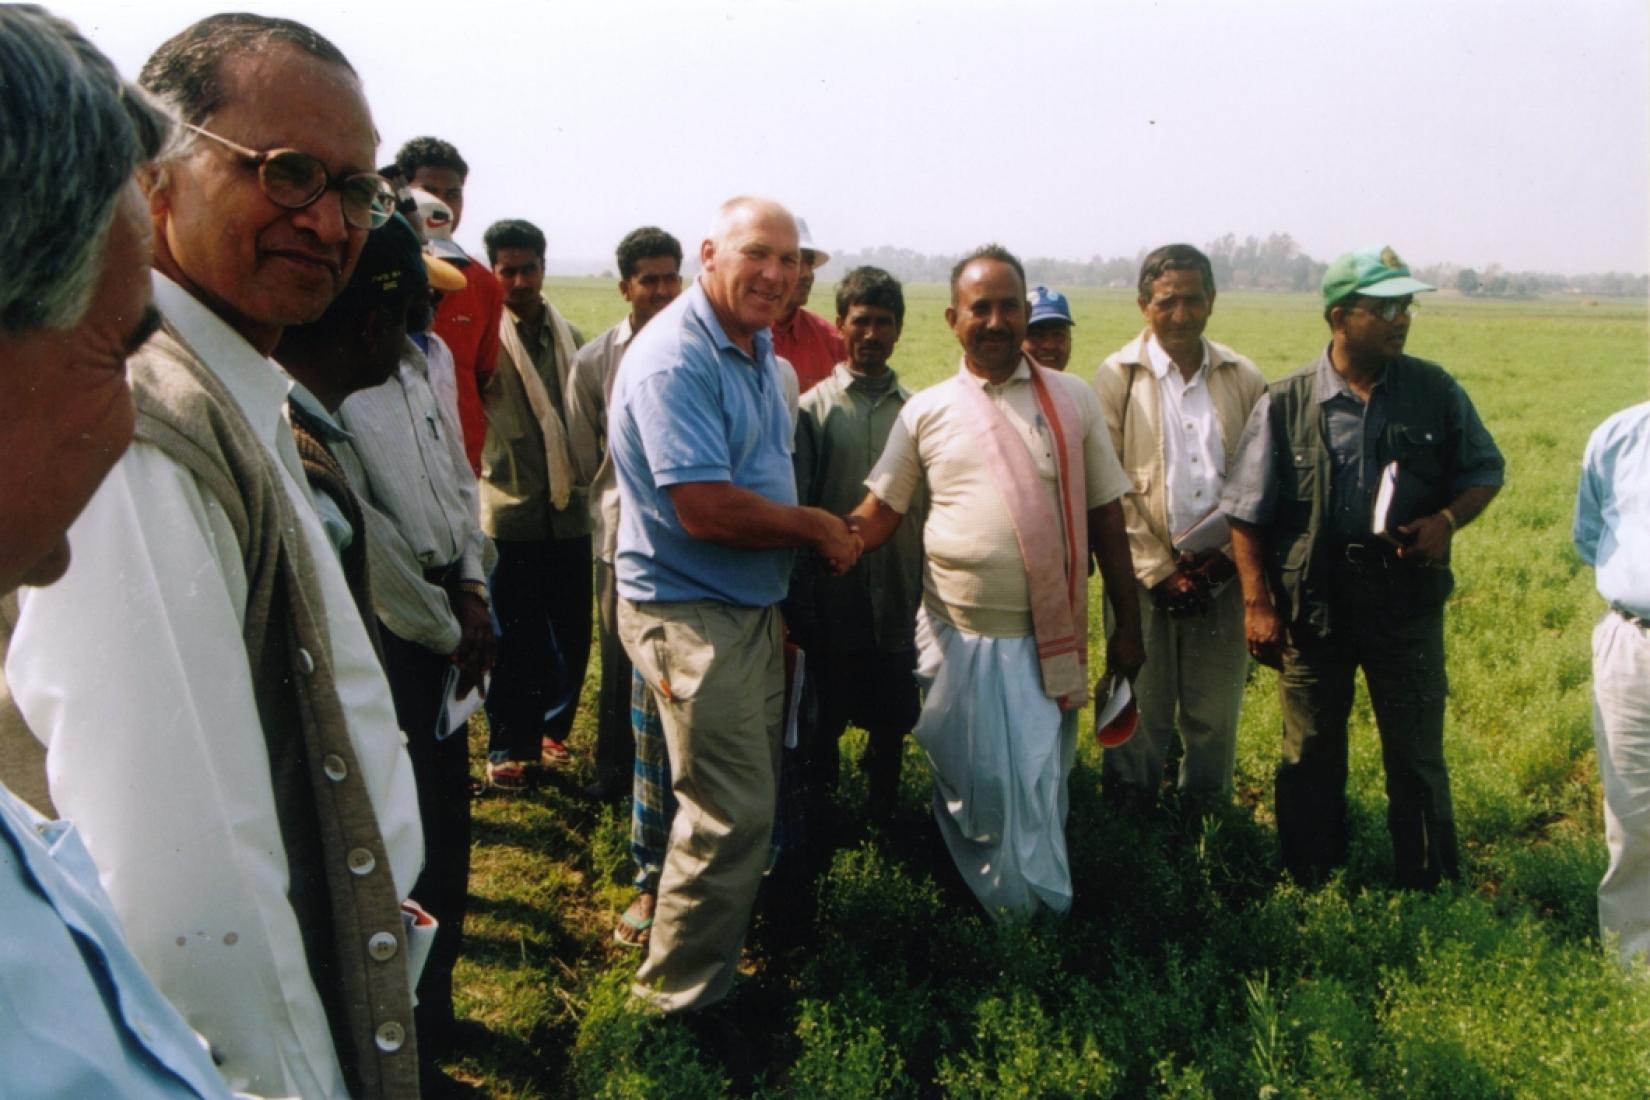 Men shaking hands in field with a group of men around them 